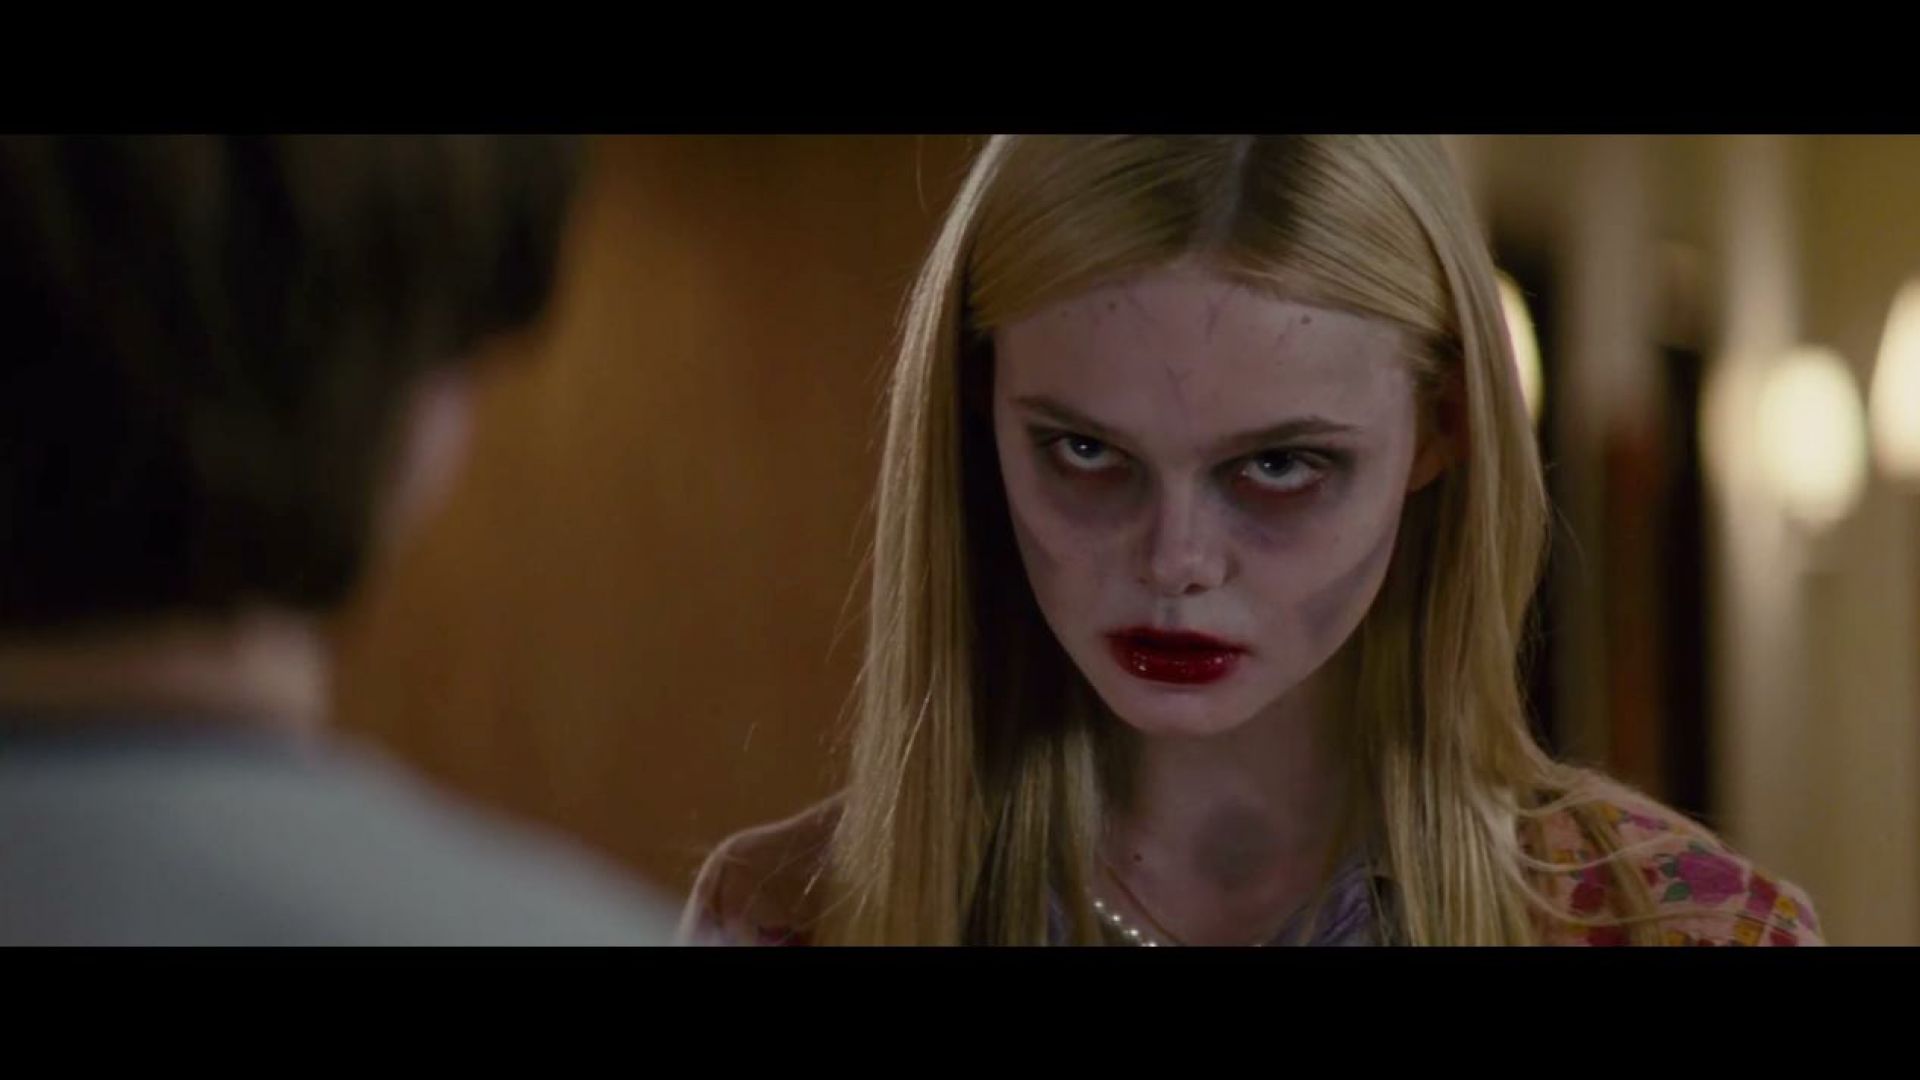 How to play a zombie, Super 8